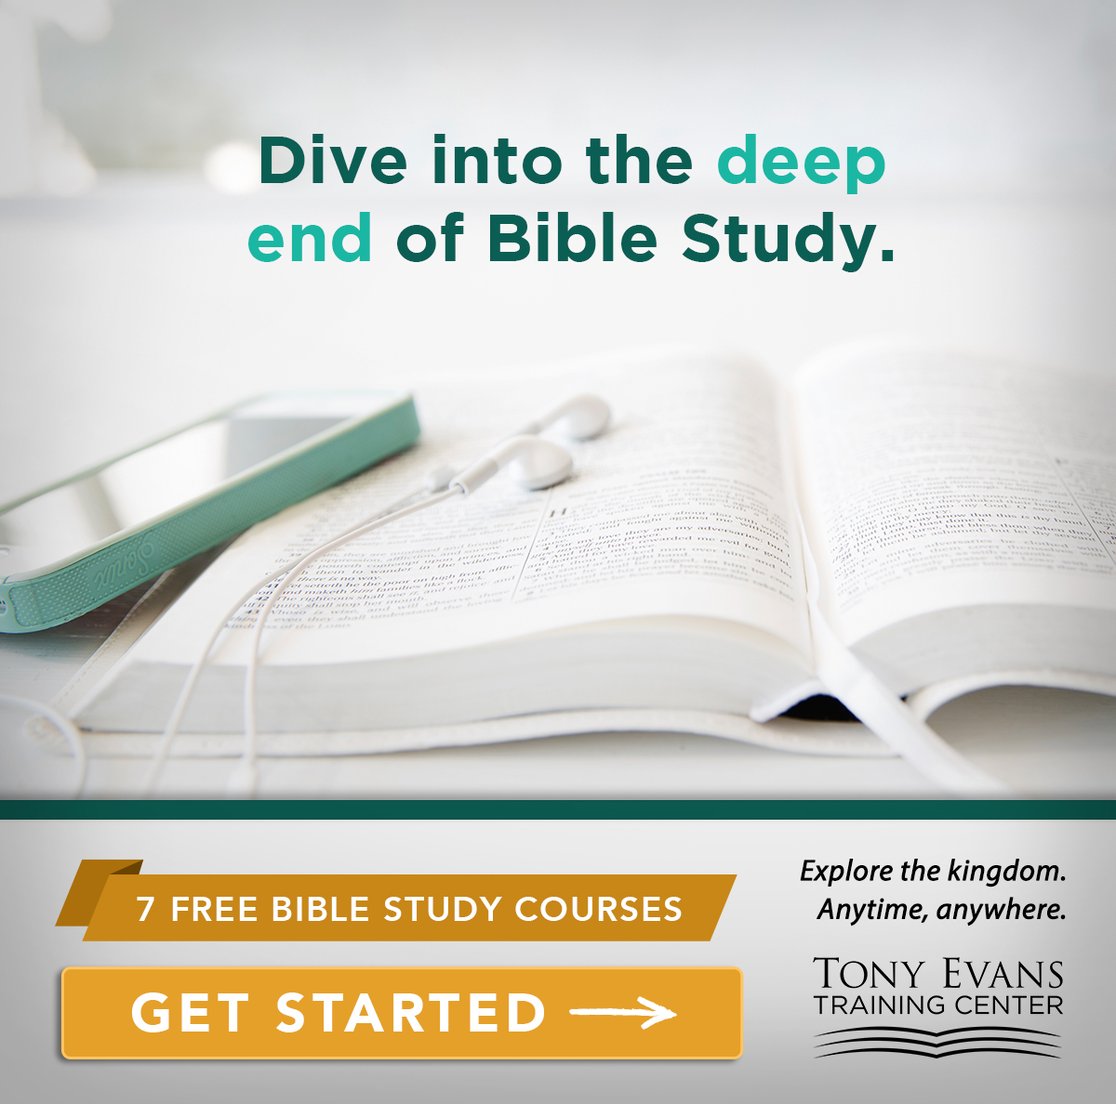 Dive into the deep end of Bible Study